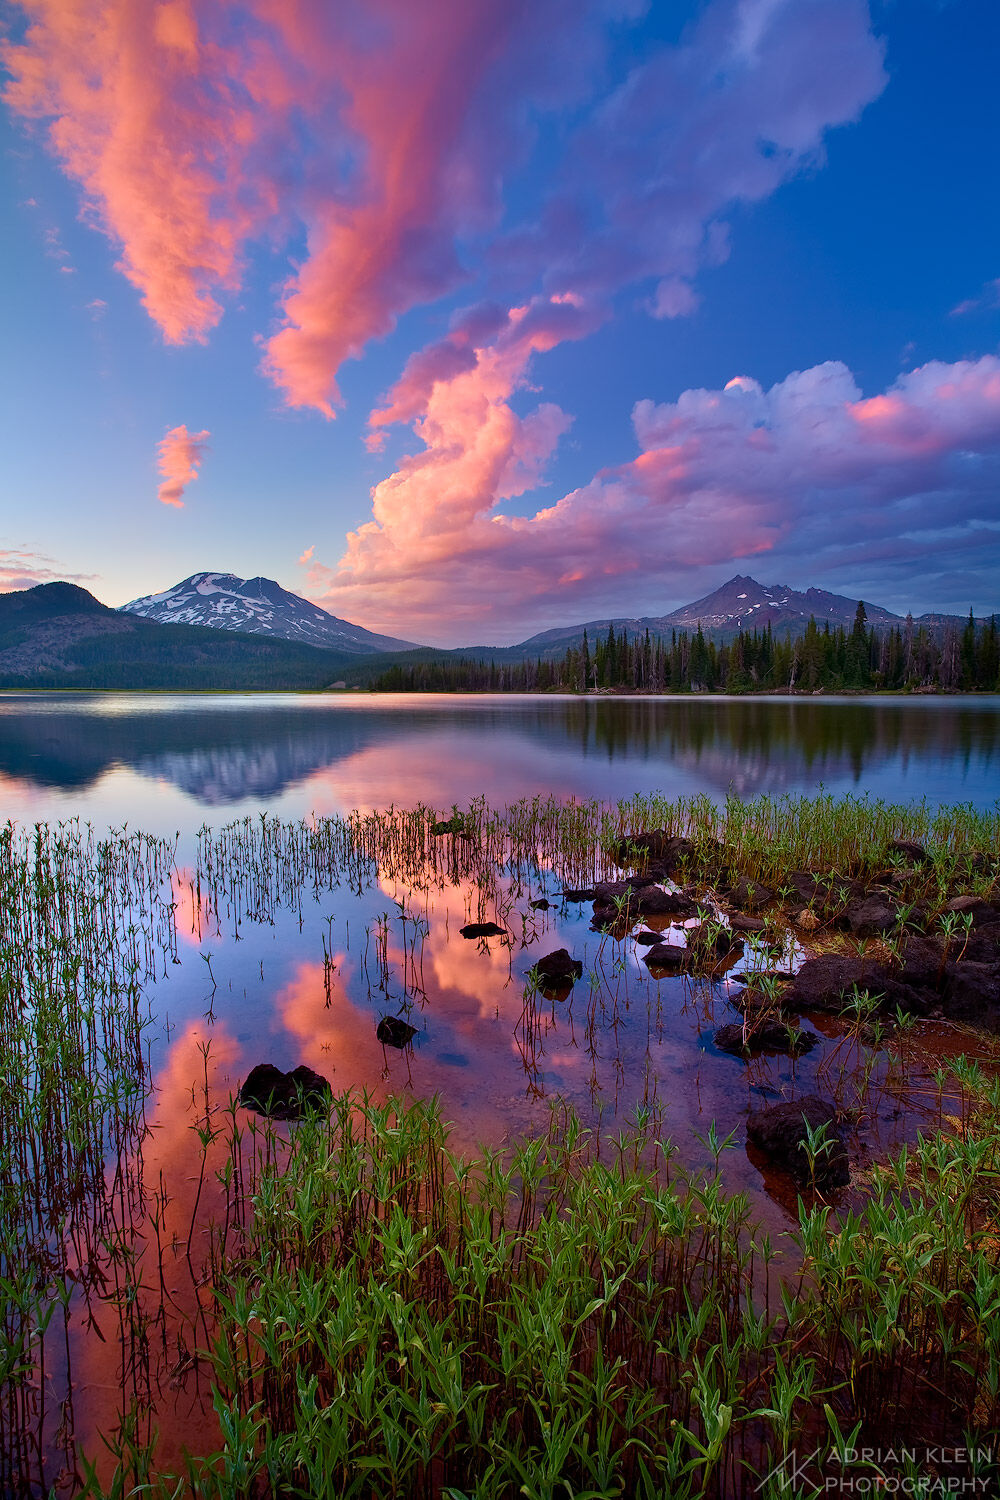 Clouds at sunset reflect in Sparks Lake in the high desert of Central Oregon. Limited Edition of 50.